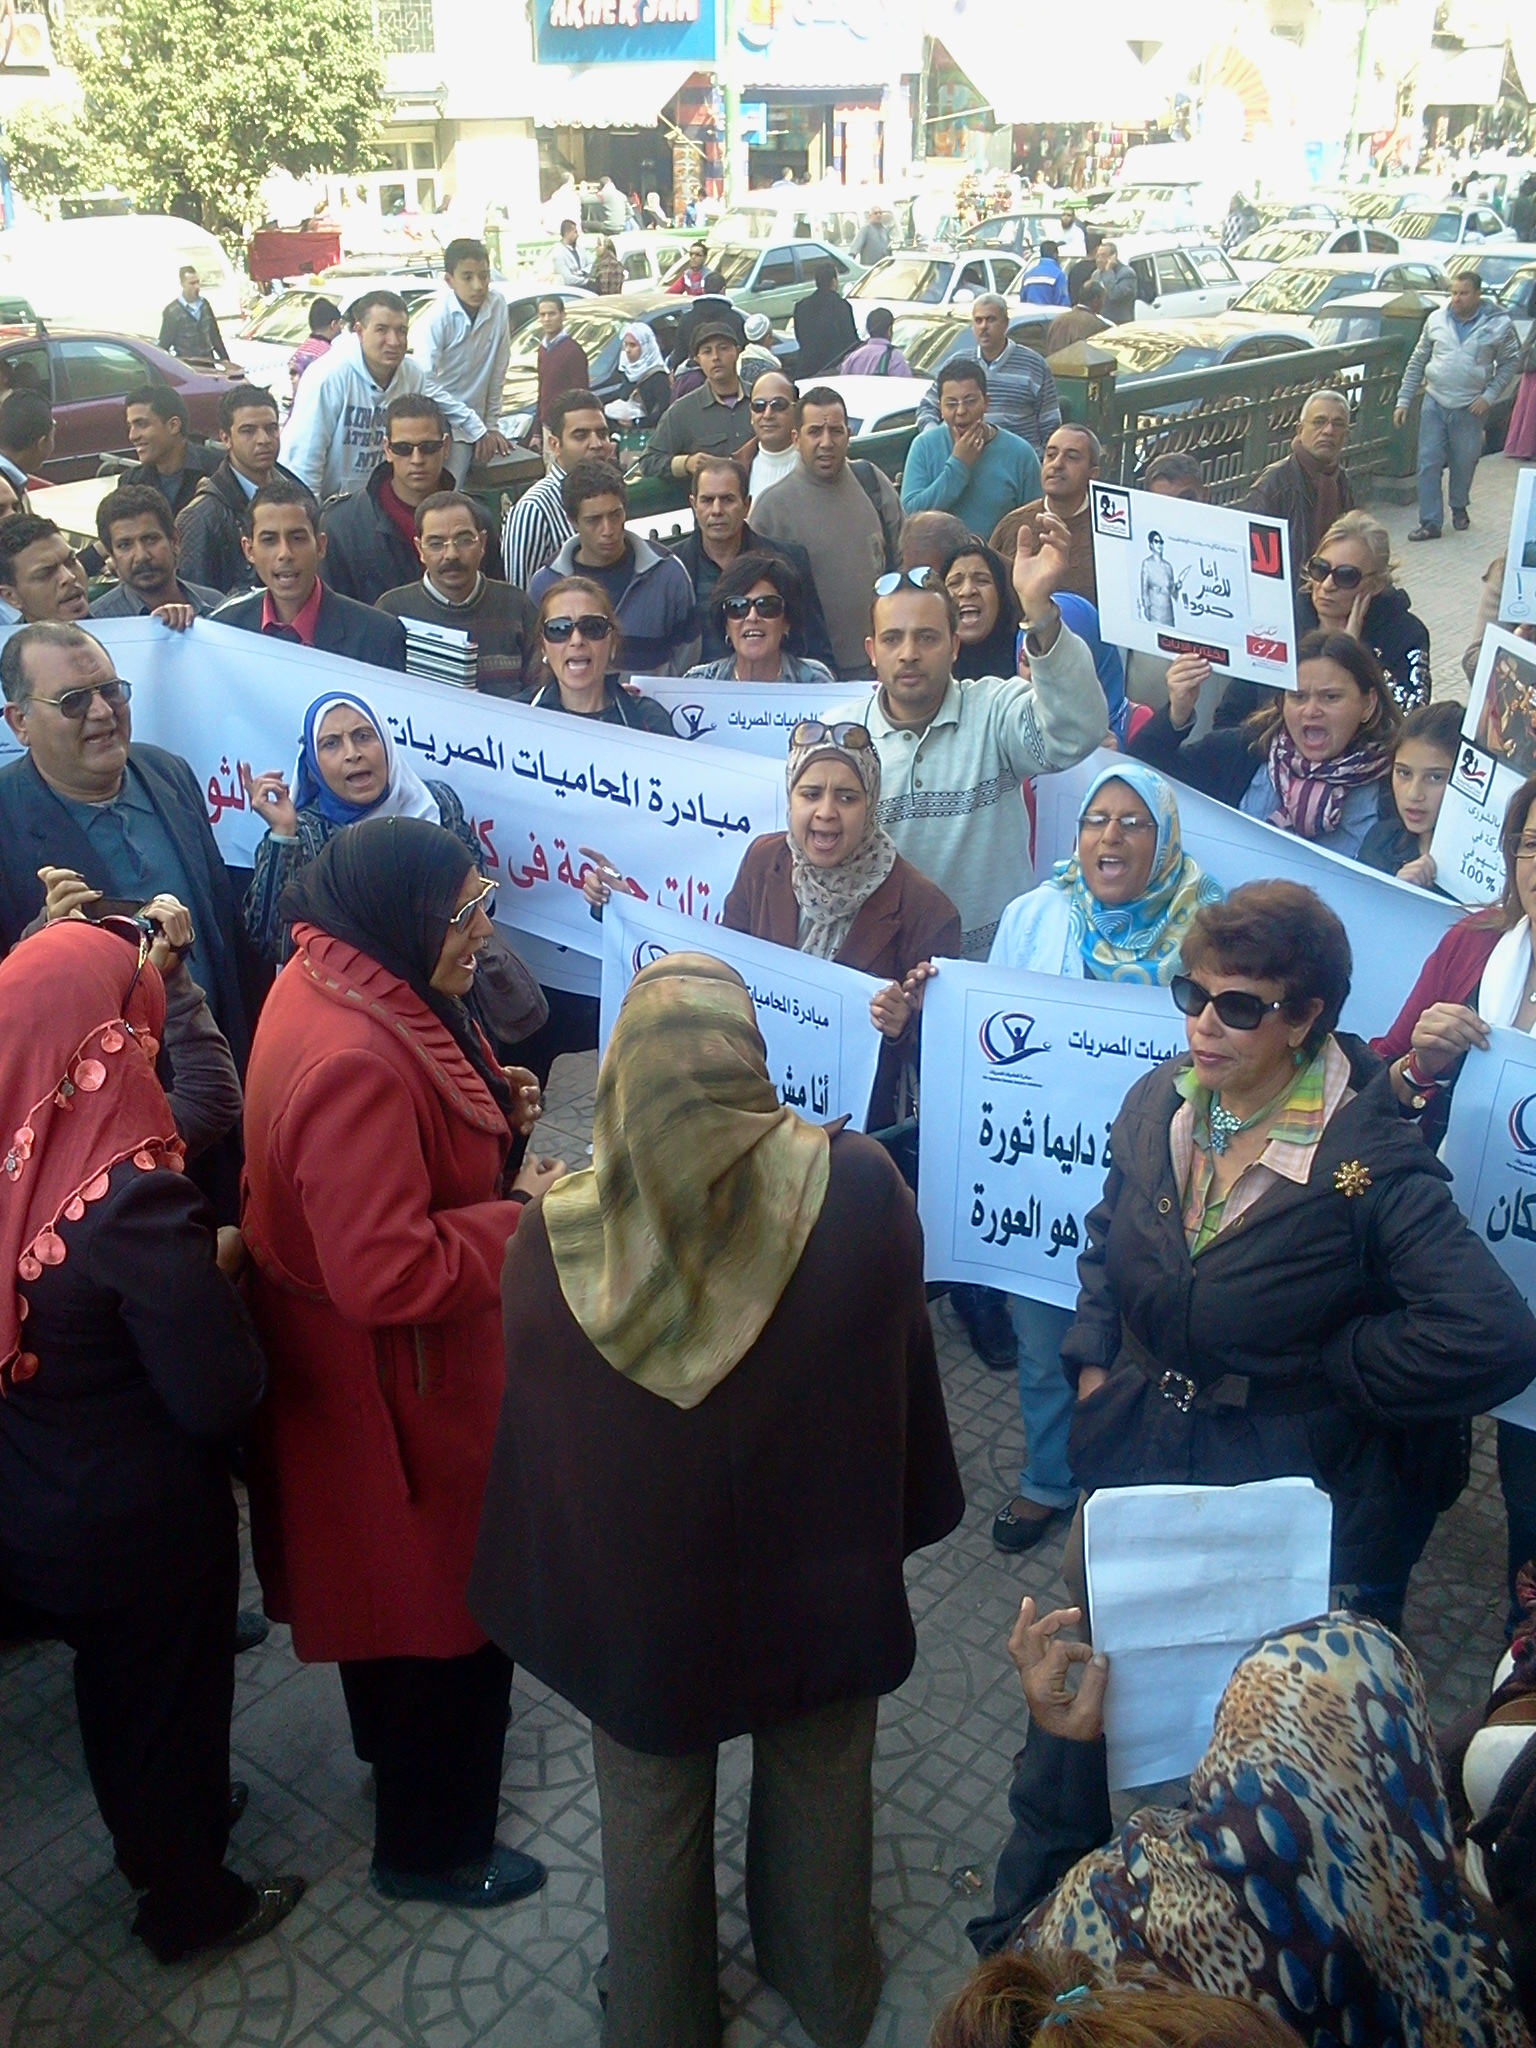 Tens of women gathered on Wednesday in front of the Prosecutor General’s office, in the High Court complex, protesting against statements insulting women made by several high profile figures recently. (Photo By Fady Salah)